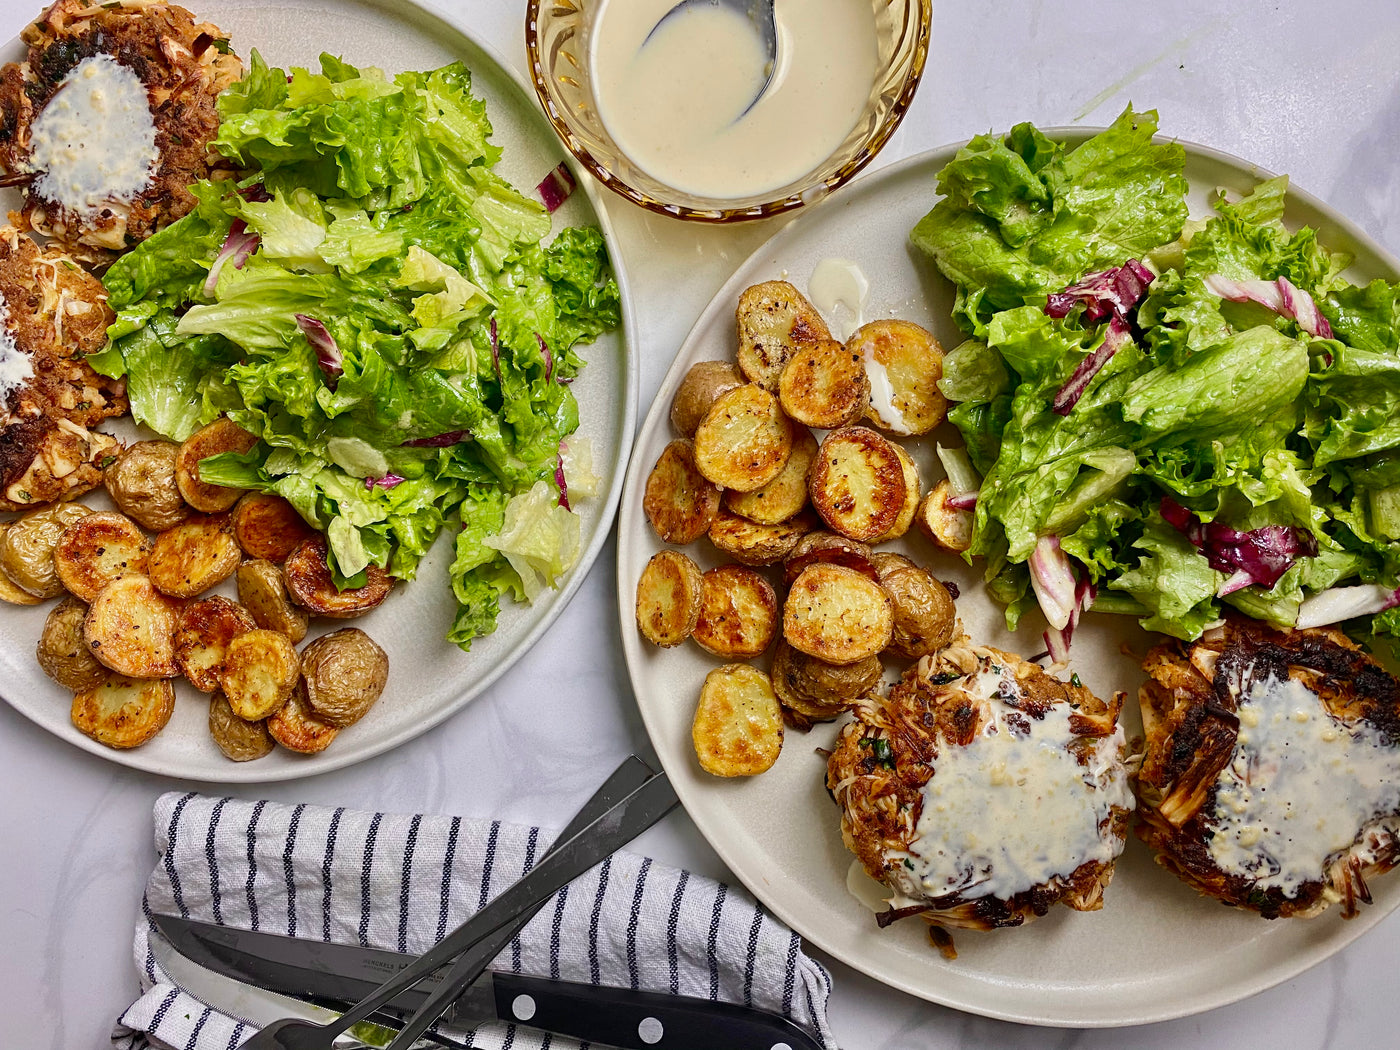 Jackfruit 'Crab' Cakes with Spring Greens and Roasted Potatoes